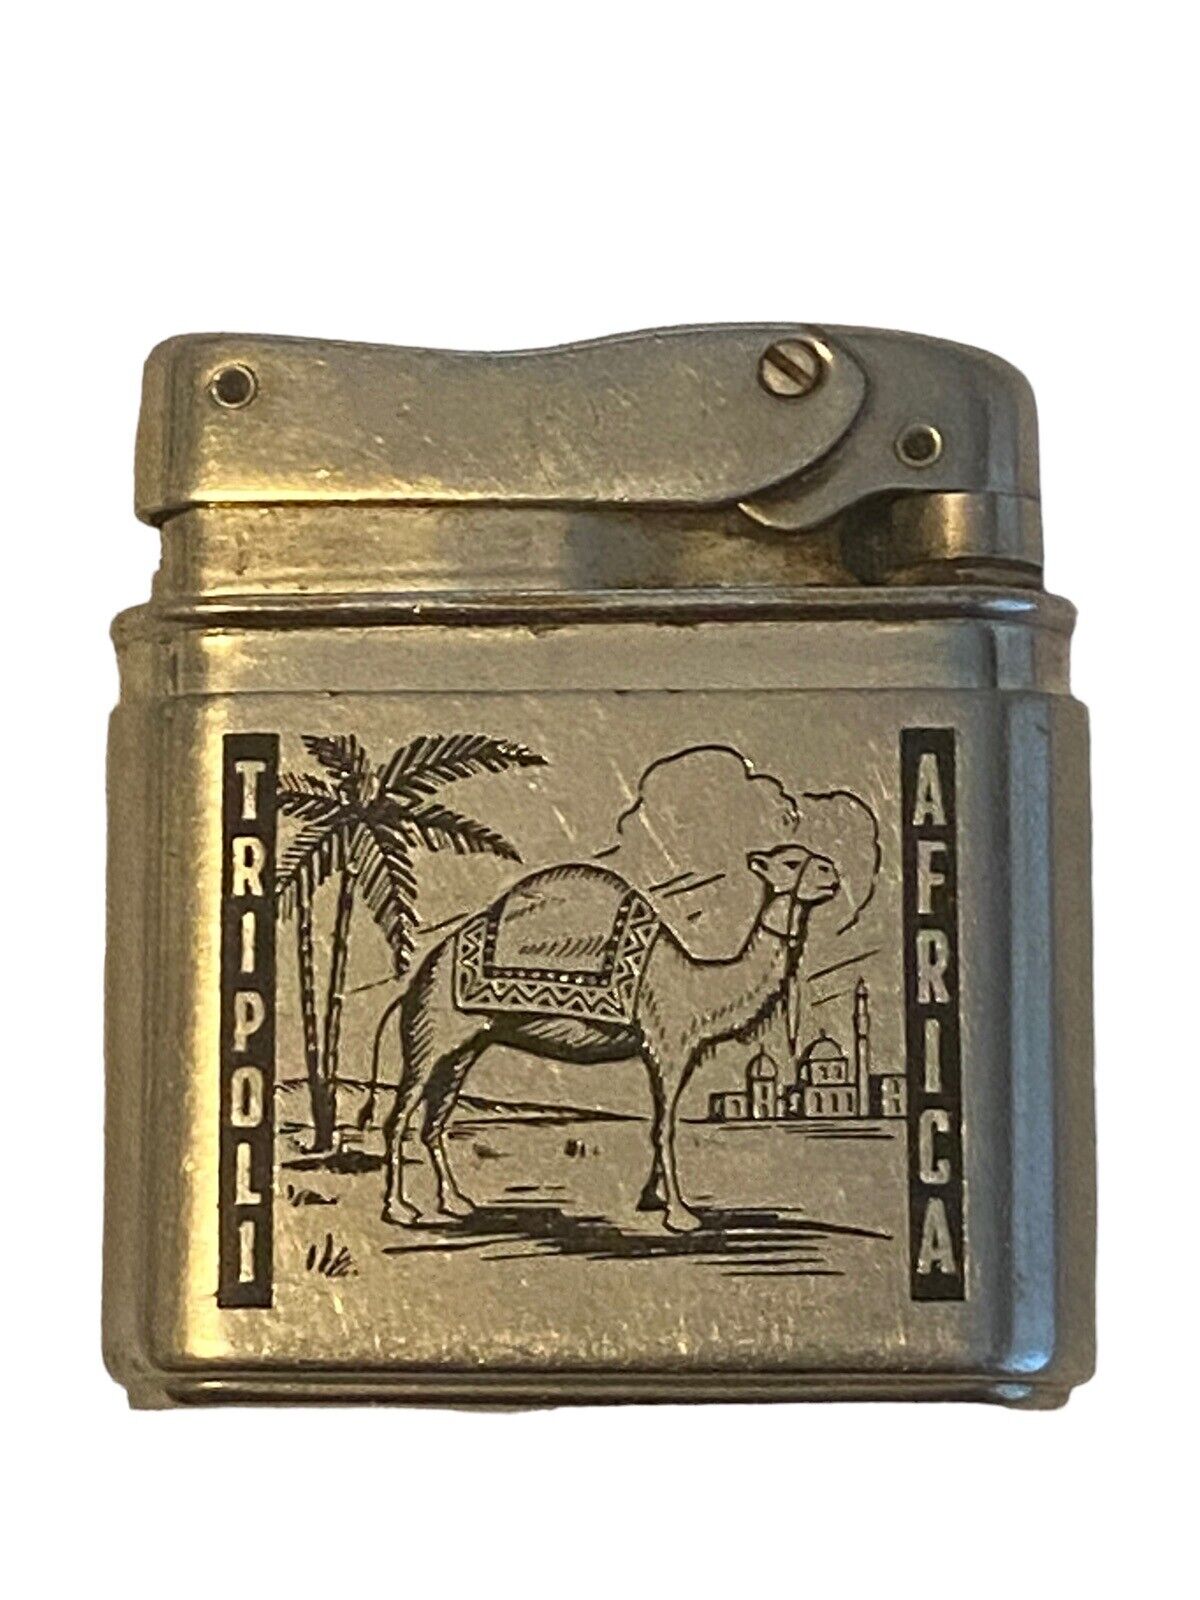 VINTAGE MYLFLAM 1940's LIGHTER Tripoli Africa Excellent Condition Very Rare